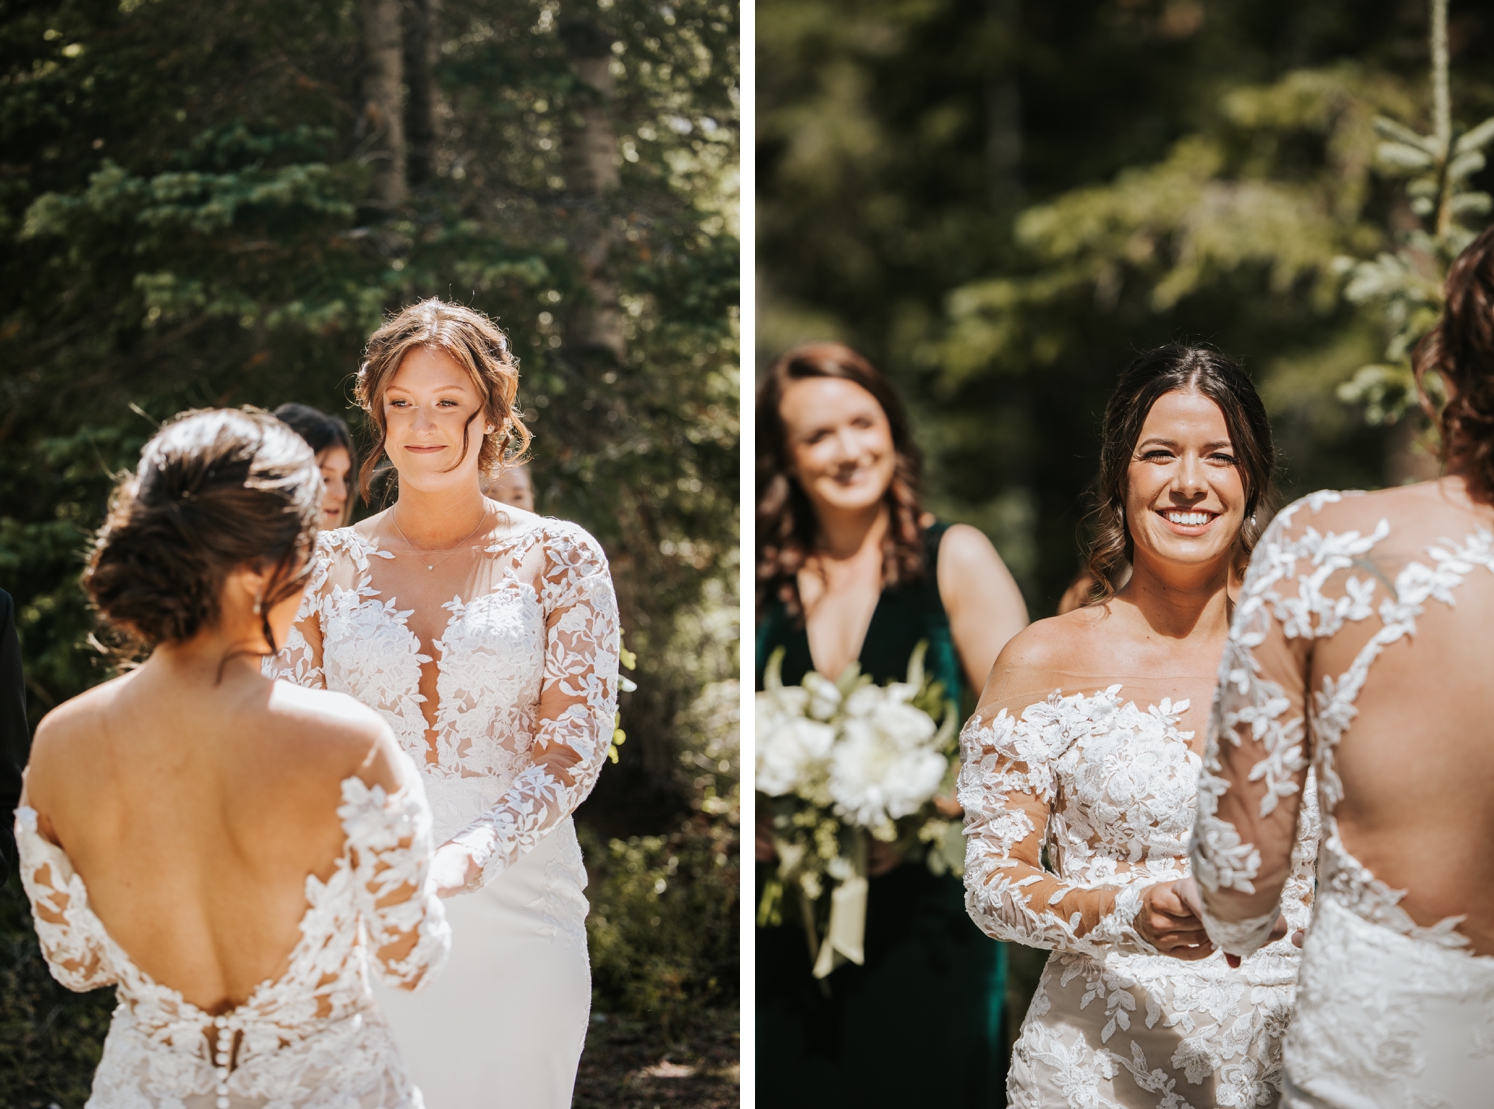 Couple holding hands at lakeside ceremony at Telluride wedding | Couple smiling during ceremony at Telluride wedding | McArthur Weddings and Events